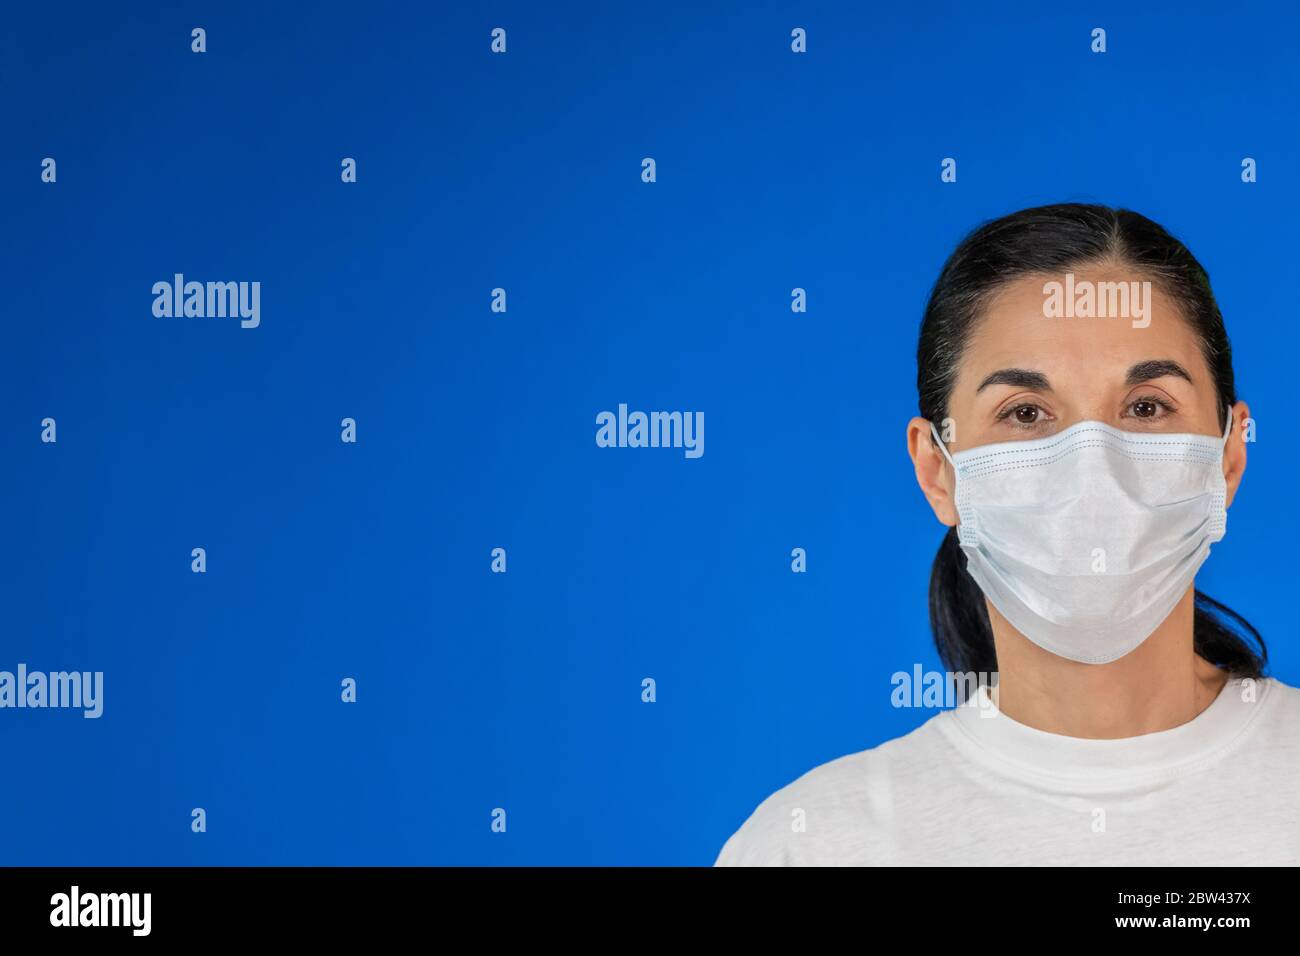 Isolated Woman wearing protective mask against blue background and with large copy space. Health issue concept, preventive measure against Covid-19 Stock Photo